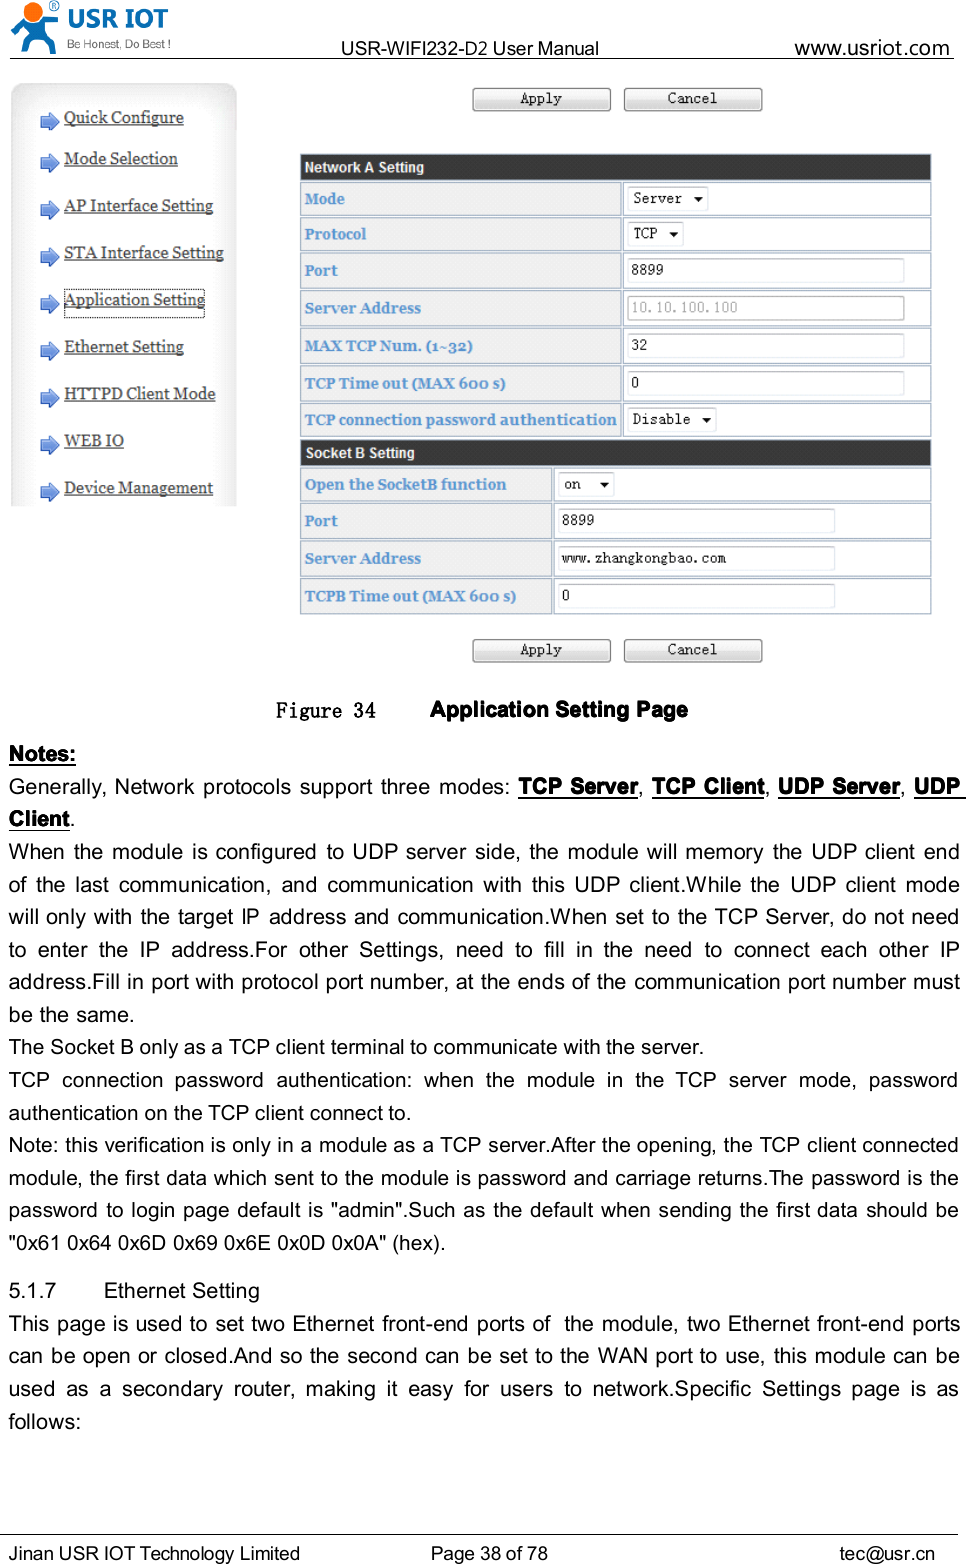 USR-WIFI232- D2 User Manual www.usr iot .comJinan USR IOT Technology Limited Page 38 of 78 tec@usr.cnFigure 34 ApplicationApplicationApplicationApplication SettingSettingSettingSetting PagePagePagePageNotes:Notes:Notes:Notes:Generally, Network protocols support three modes: TCPTCPTCPTCP ServerServerServerServer ,TCPTCPTCPTCP ClientClientClientClient ,UDPUDPUDPUDP ServerServerServerServer ,UDPUDPUDPUDPClientClientClientClient .When the module is configured to UDP server side, the module will memory the UDP client endof the last communication, and communication with this UDP client.While the UDP client modewill only with the targetIPaddress and communication.When set to the TCP Server, do not needto enter the IP address.For other Settings, need to fill in the need to connect each other IPaddress.Fill in port with protocol port number, at the ends of the communication port number mustbe the same.The Socket B only as a TCP client terminal to communicate with the server.TCP connection password authentication: when the module in the TCP server mode, passwordauthentication on the TCP client connect to.Note: this verification is only in a module as a TCP server.After the opening, the TCP client connectedmodule, the first data which sent to the module is password and carriage returns.The password is thepassword to login page default is &quot;admin&quot;.Such as the default when sending the first data should be&quot;0x61 0x64 0x6D 0x69 0x6E 0x0D 0x0A&quot; (hex) .5.1.7 Ethernet SettingThis page is used to set two Ethernet front-end ports of the module, two Ethernet front-end portscan be open or closed.And so the second can be set to the WAN port to use, this module can beused as a secondary router, making it easy for users to network.Specific Settings page is asfollows: